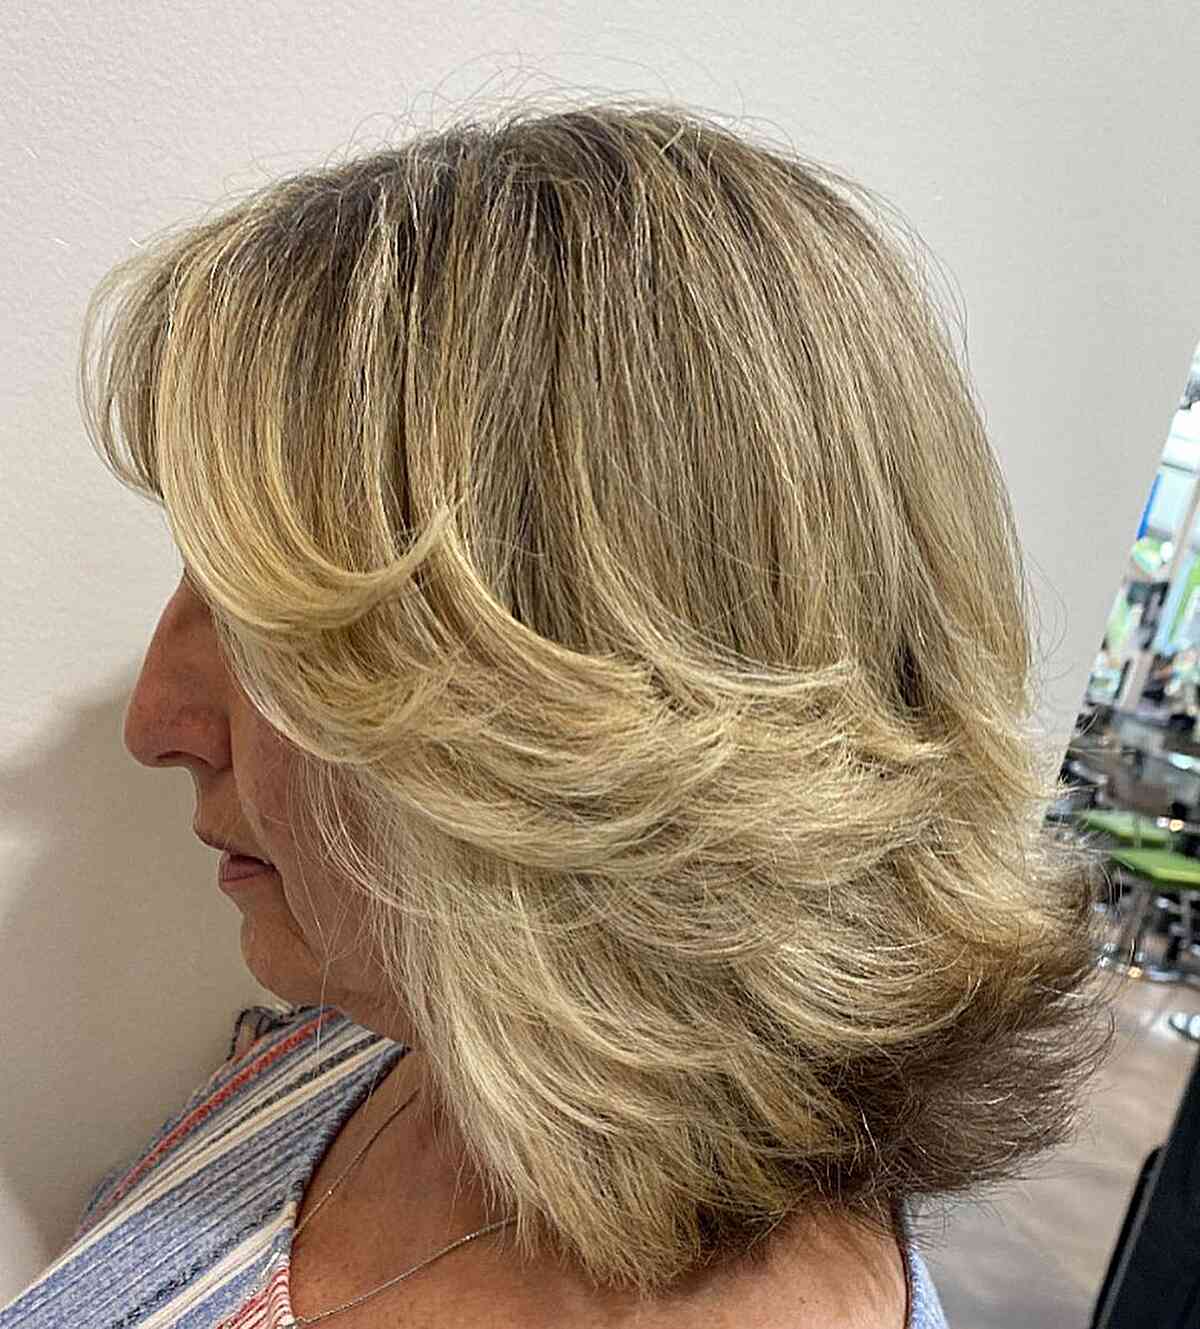 Shoulder-Length Short Layered Blowout Butterfly Style on Thick Blonde Hair